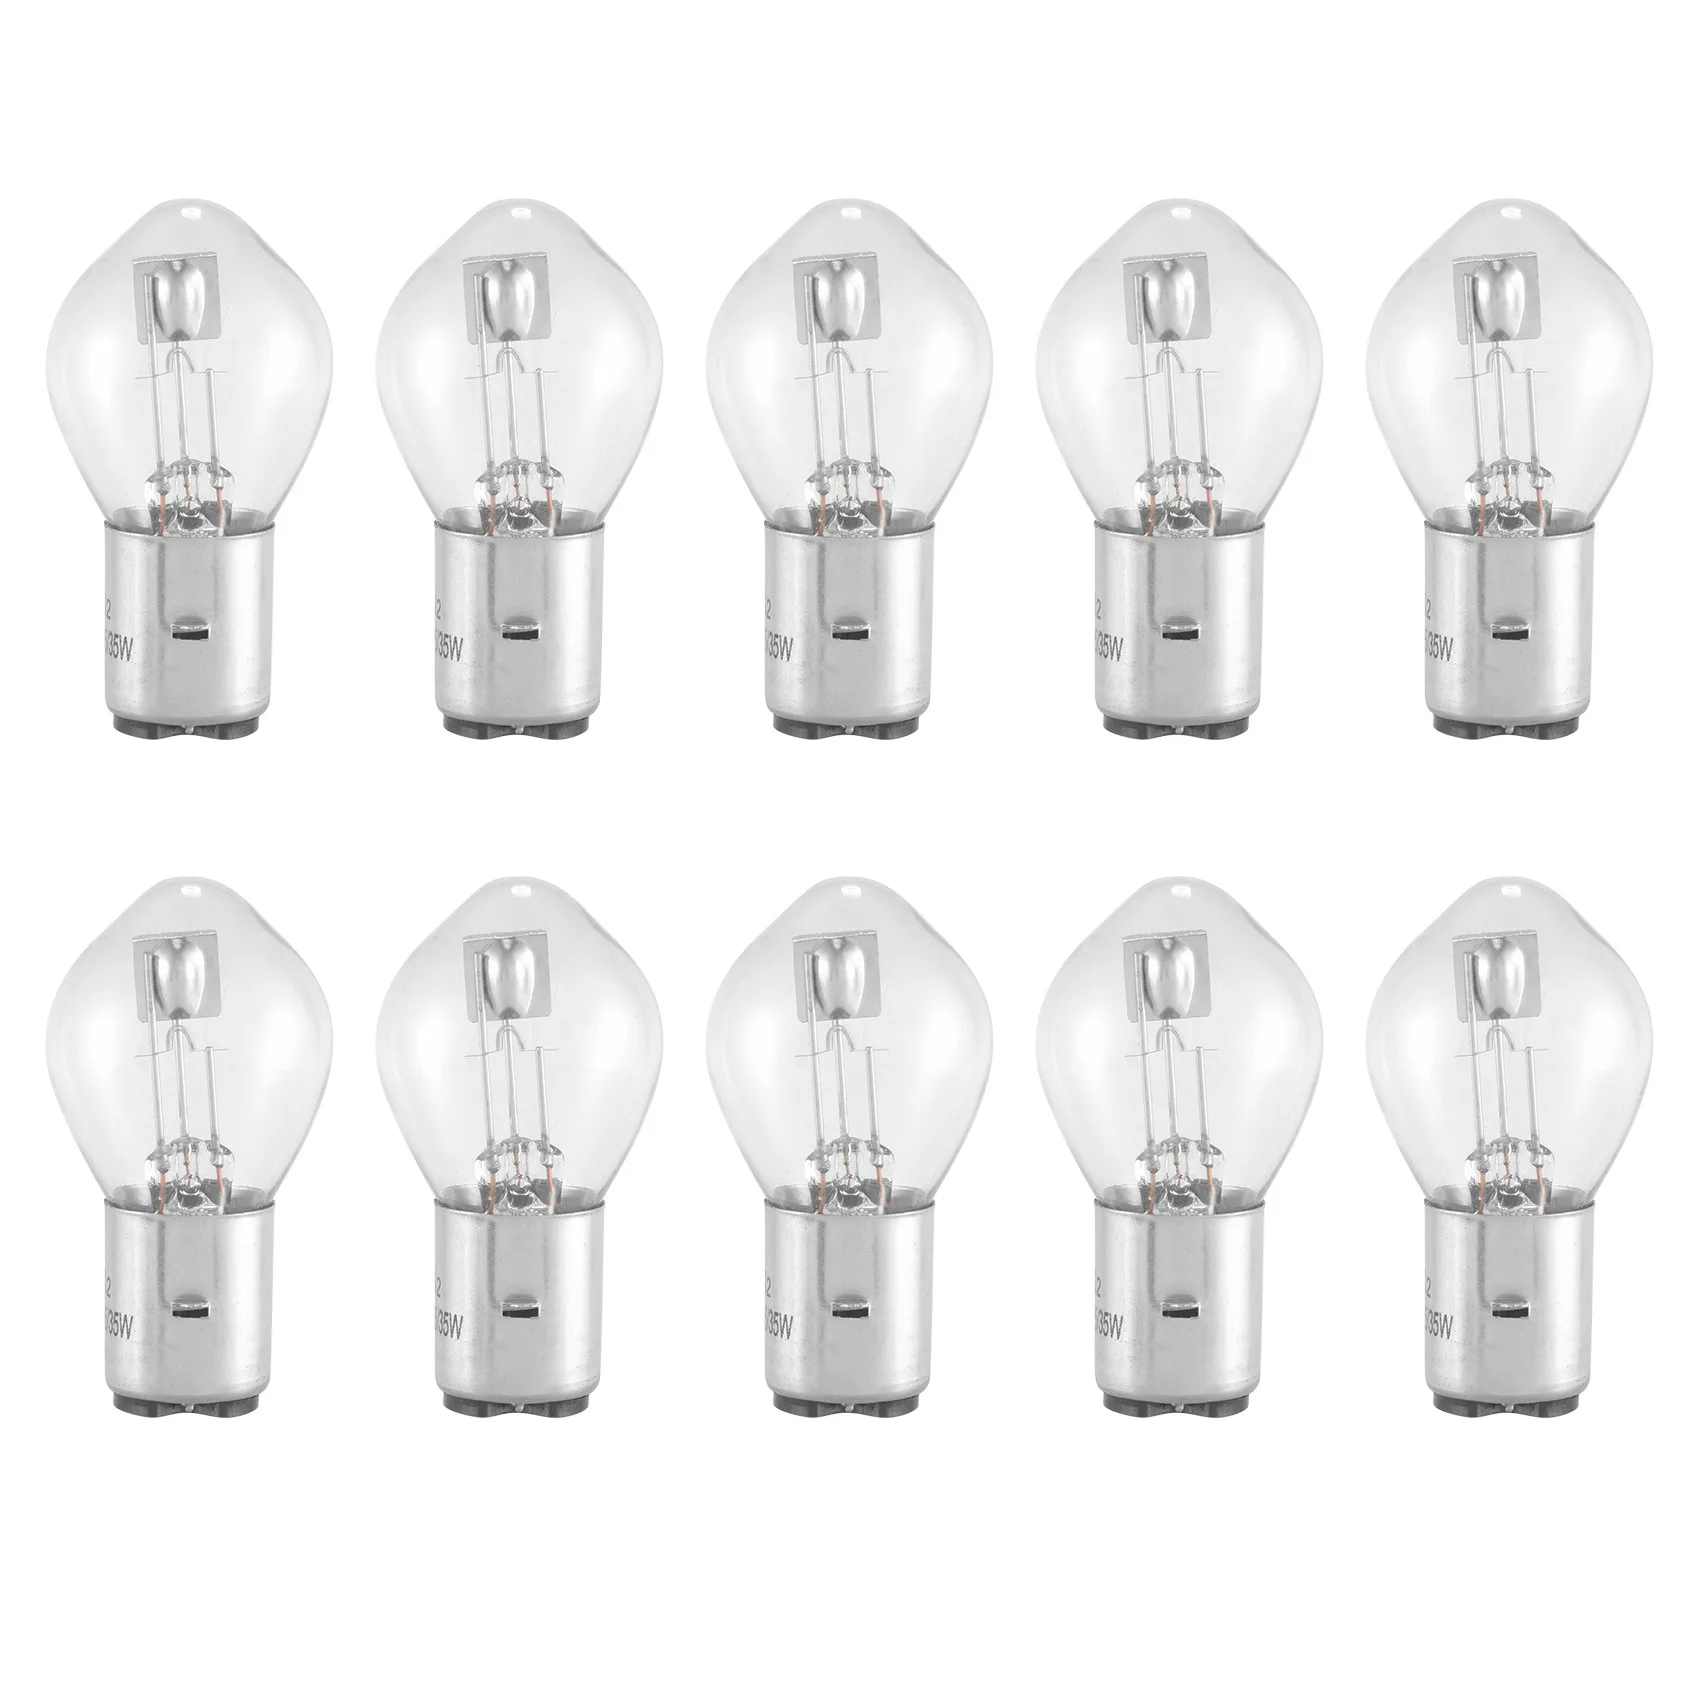 

Motorcycle Lighting 10X Headlight Bulb 12V 35W B35 BA20D Glass Fit for GY6 ATV Moped Scooter